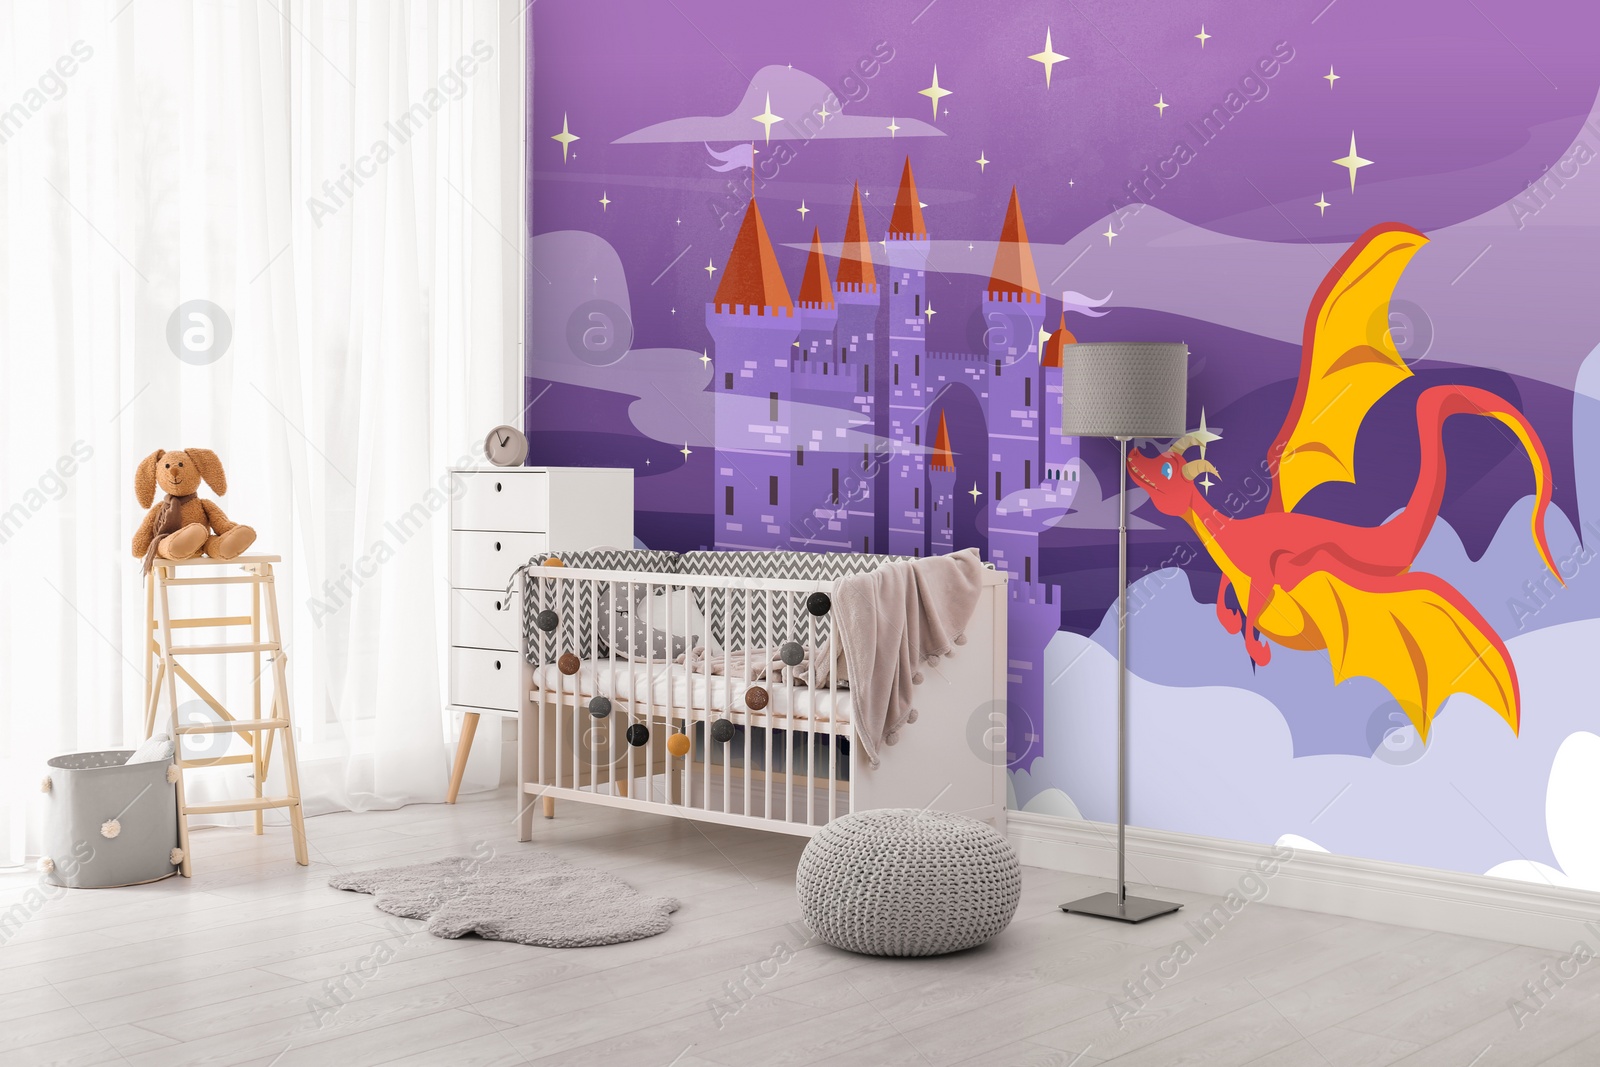 Image of Kid's room interior with crib and decor. Fairytale themed wallpapers with castle and dragon